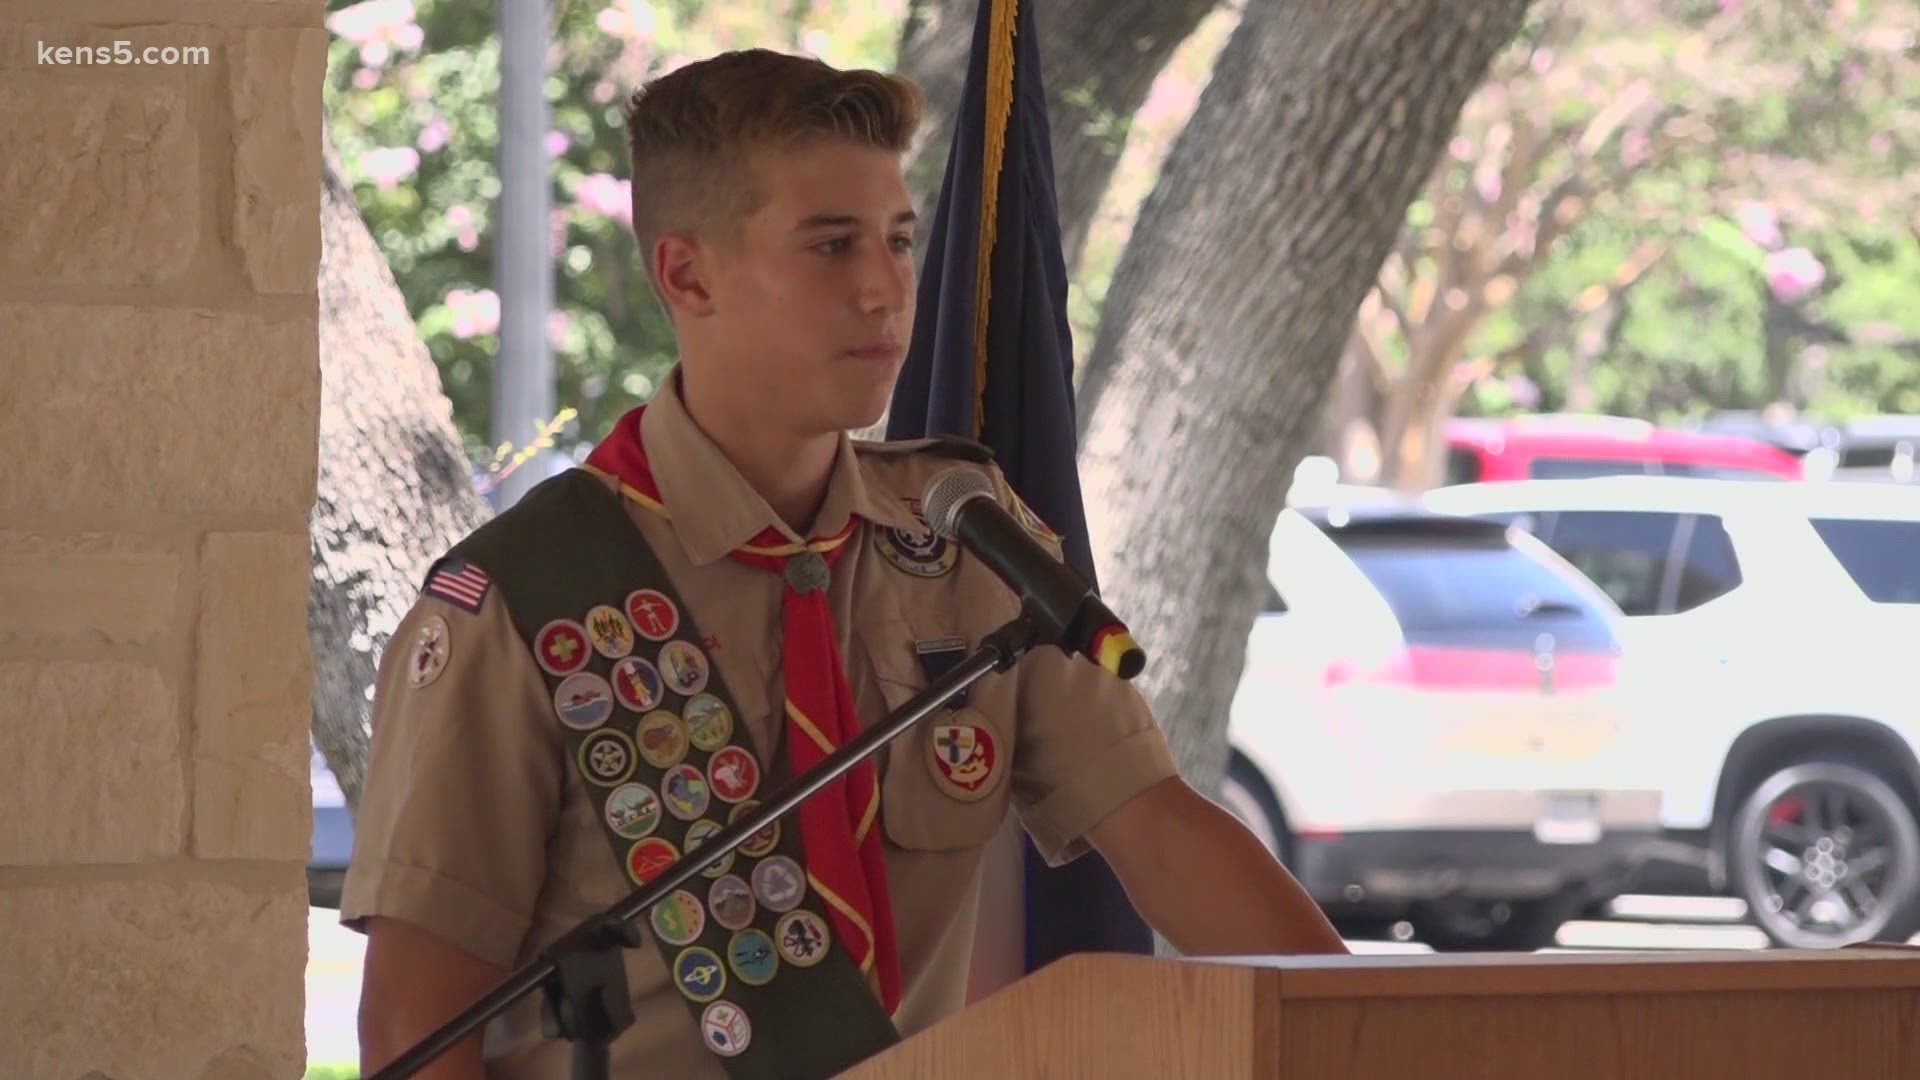 Fifteen-year old Ryan Matson wanted to honor their sacrifice. He created a monument, part of his Eagle Scout project.